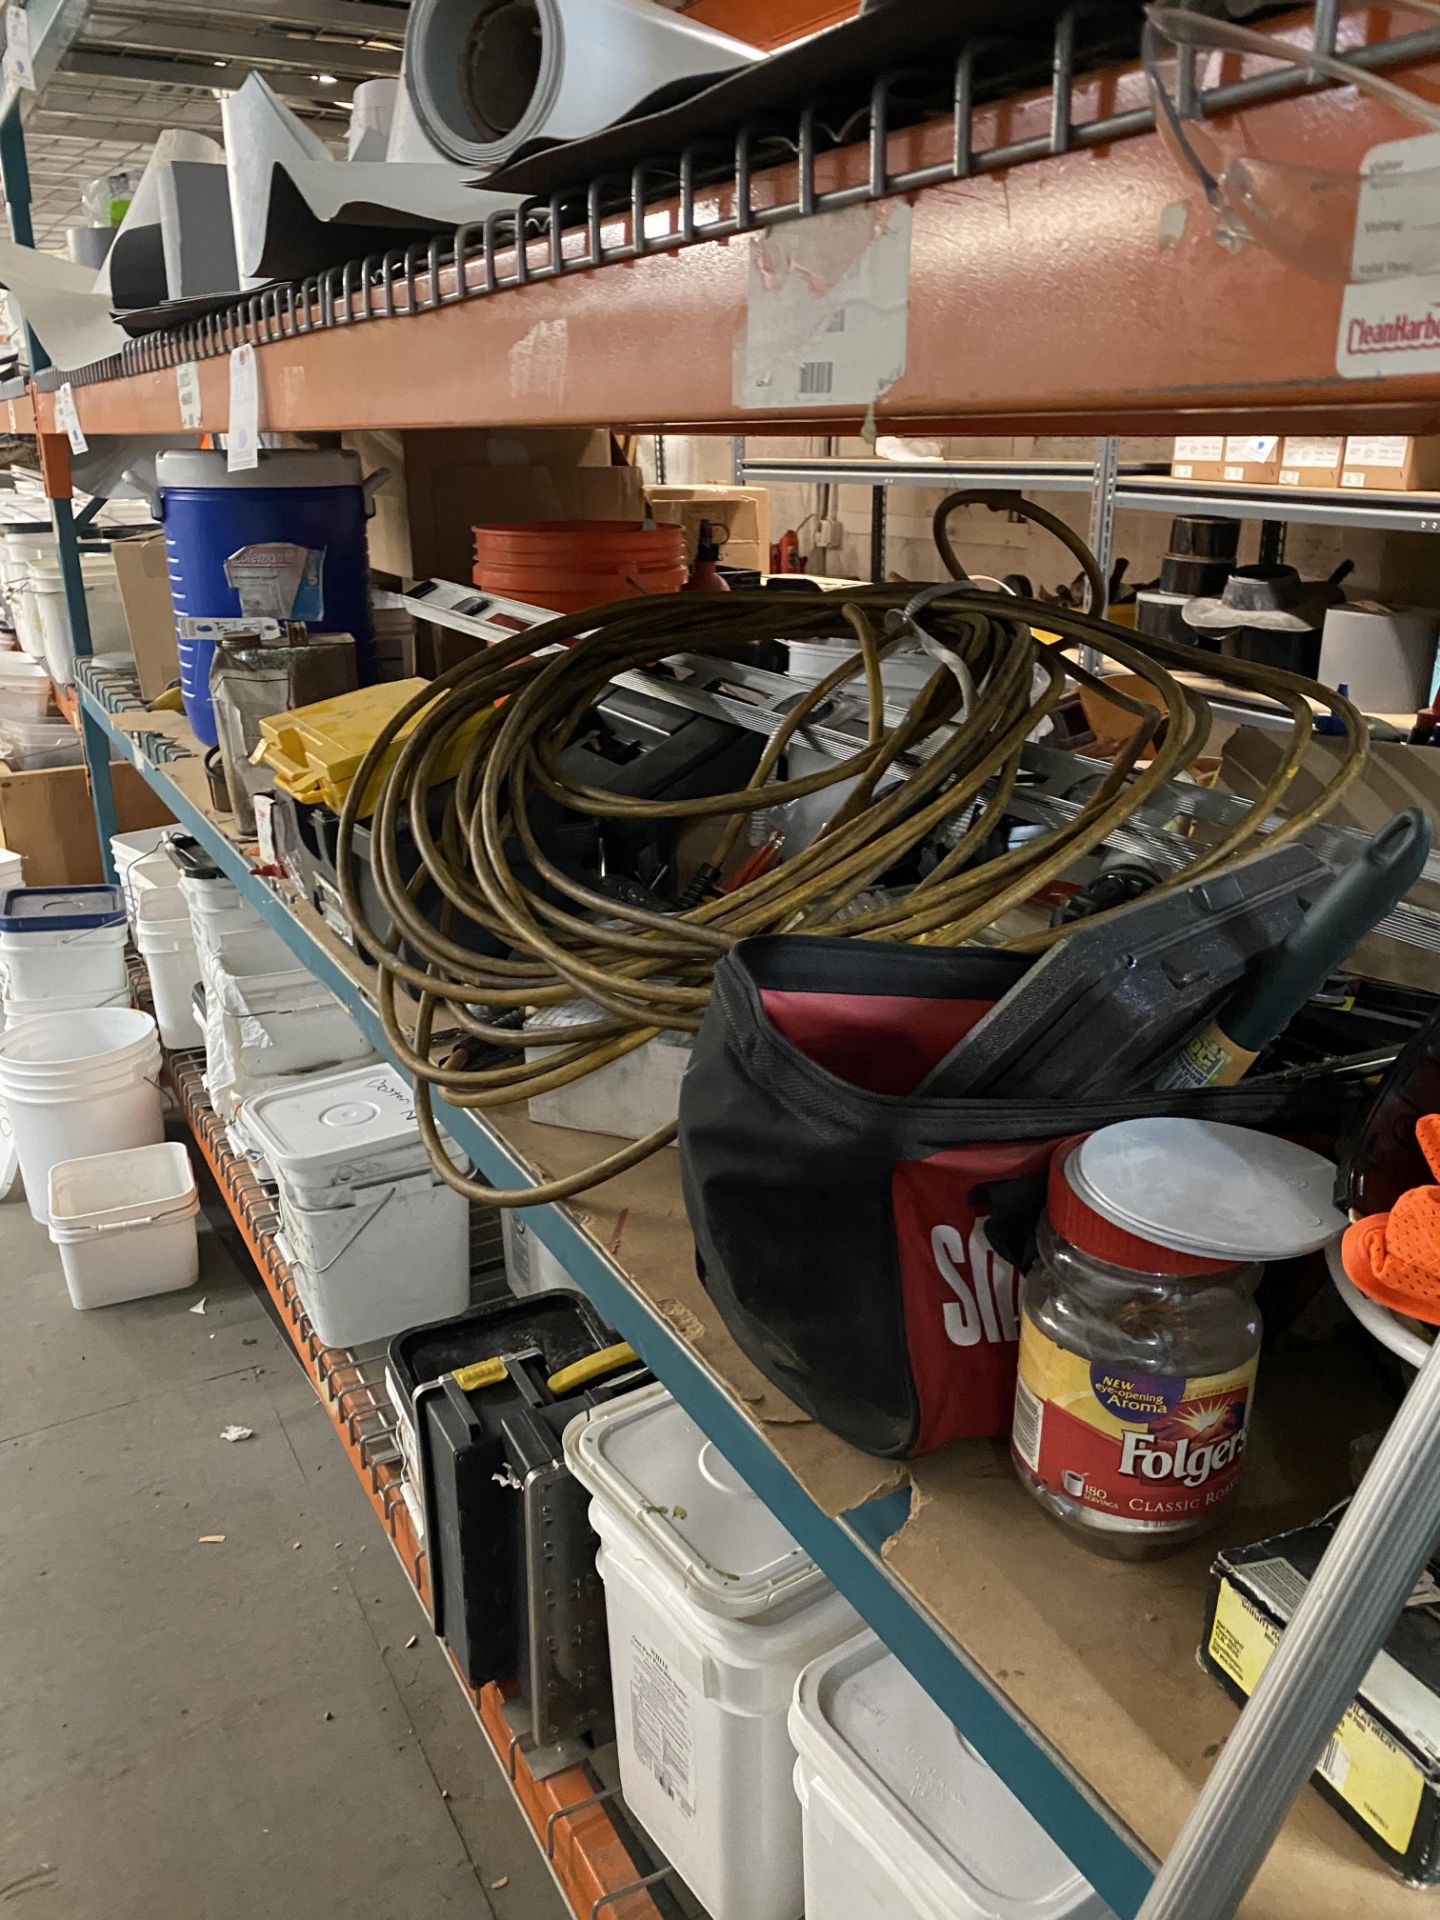 (Lot) Asst. Tools, Solvents, Lights, Tool Bags, Hard Hats On 1 Shelf ( Inspection Urged )